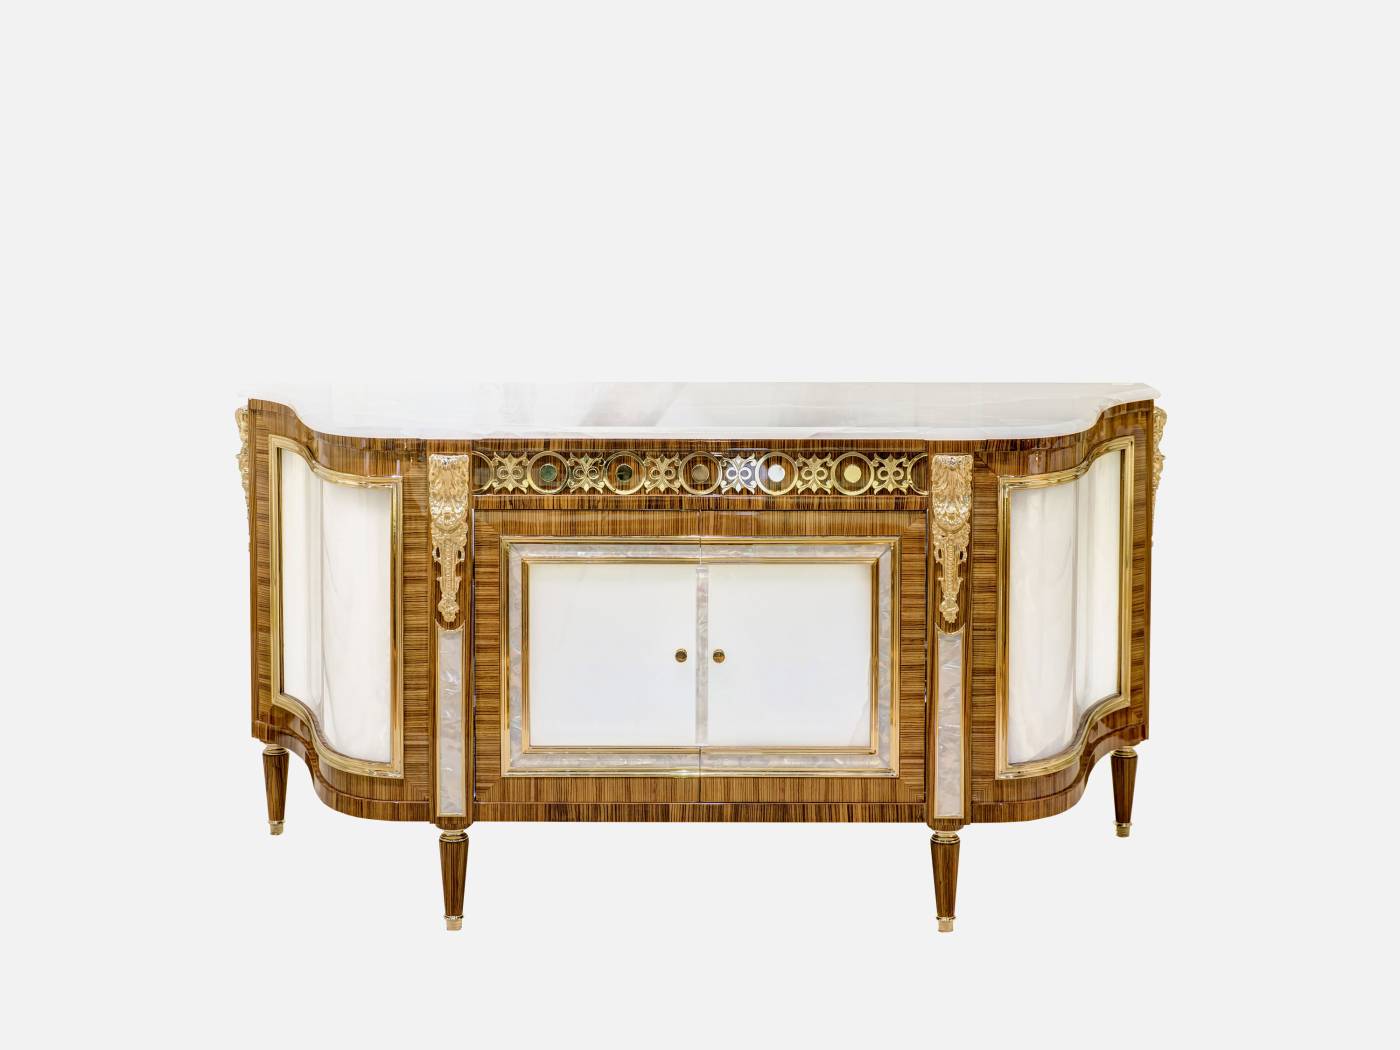 ART. 2079 – The elegance of luxury classic Sideboards made in Italy by C.G. Capelletti.